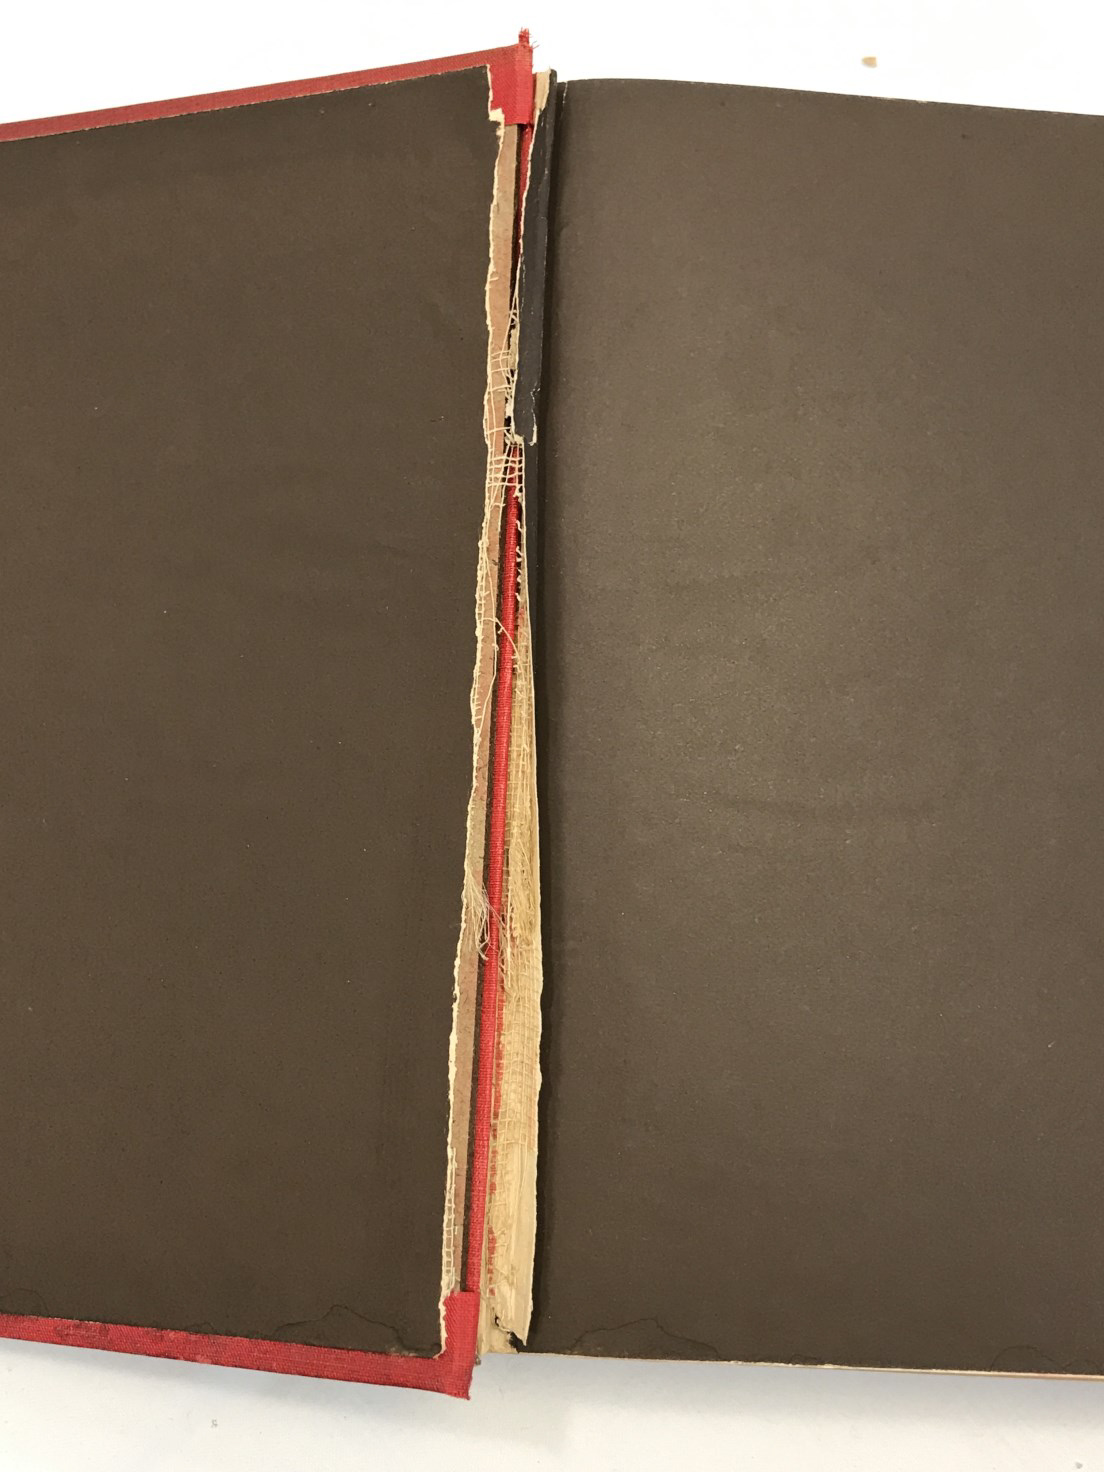 close up of book's cover damage to spine